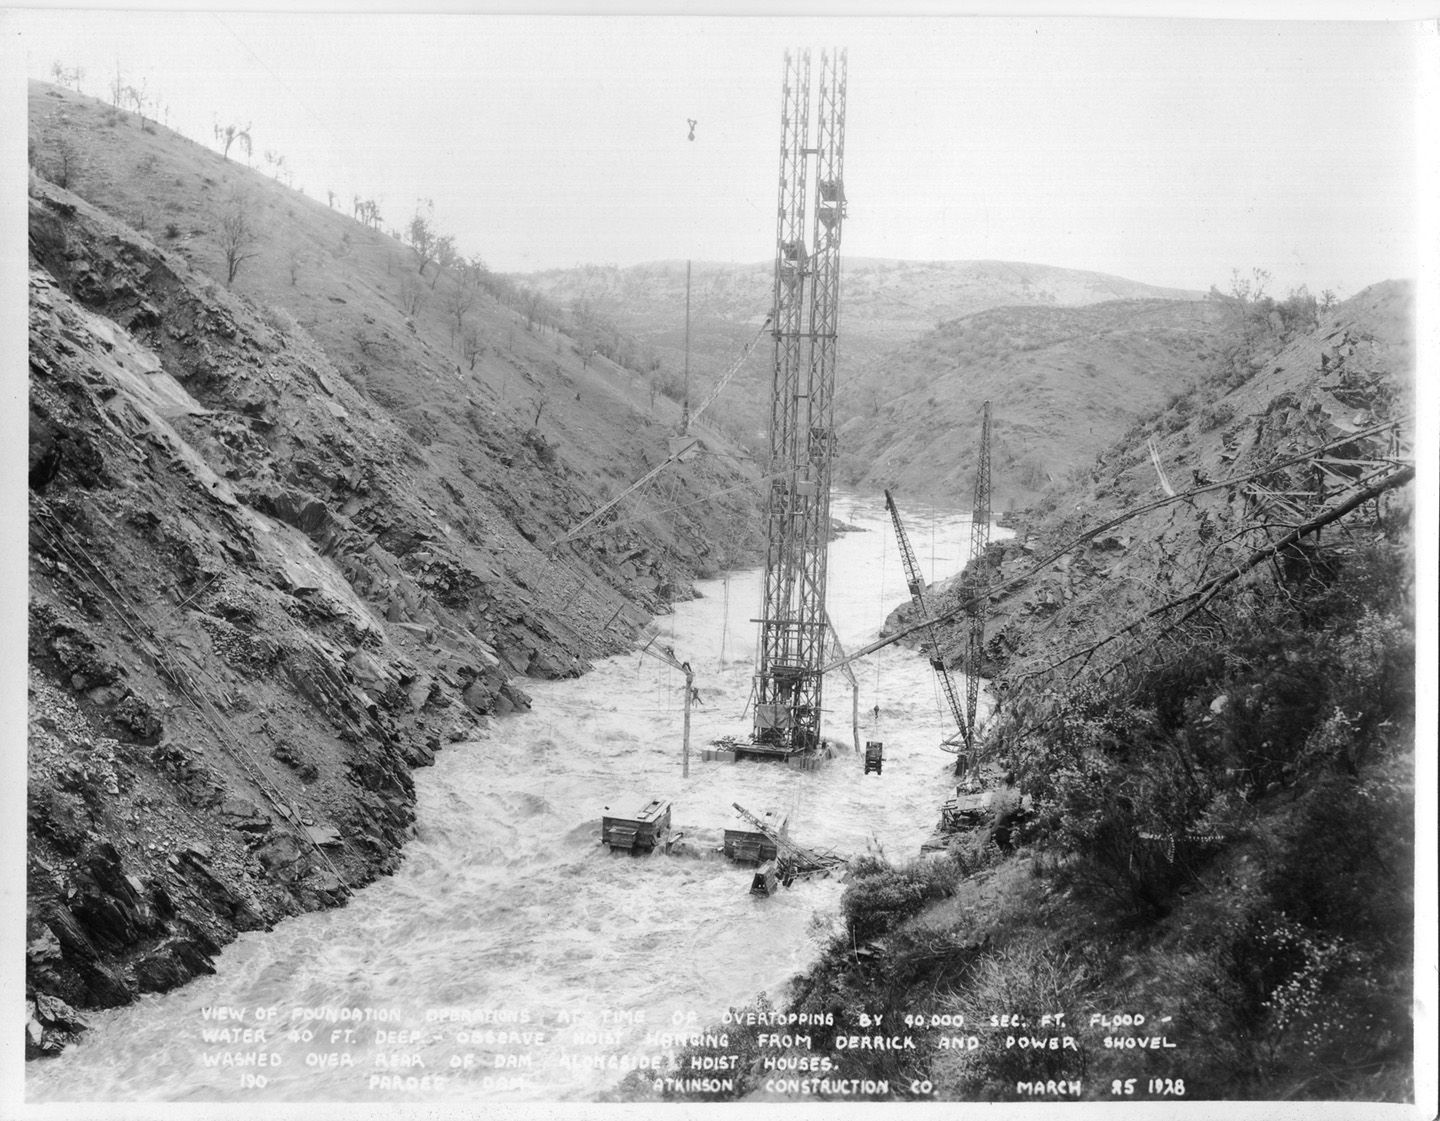 View of foundation operations at time of overtopping by 40,000 sec. ft. flood - water 40 ft. deep - observe host hanging from derrick and power shovel washed over rear of dam alongside hoist houses. (March 1928)